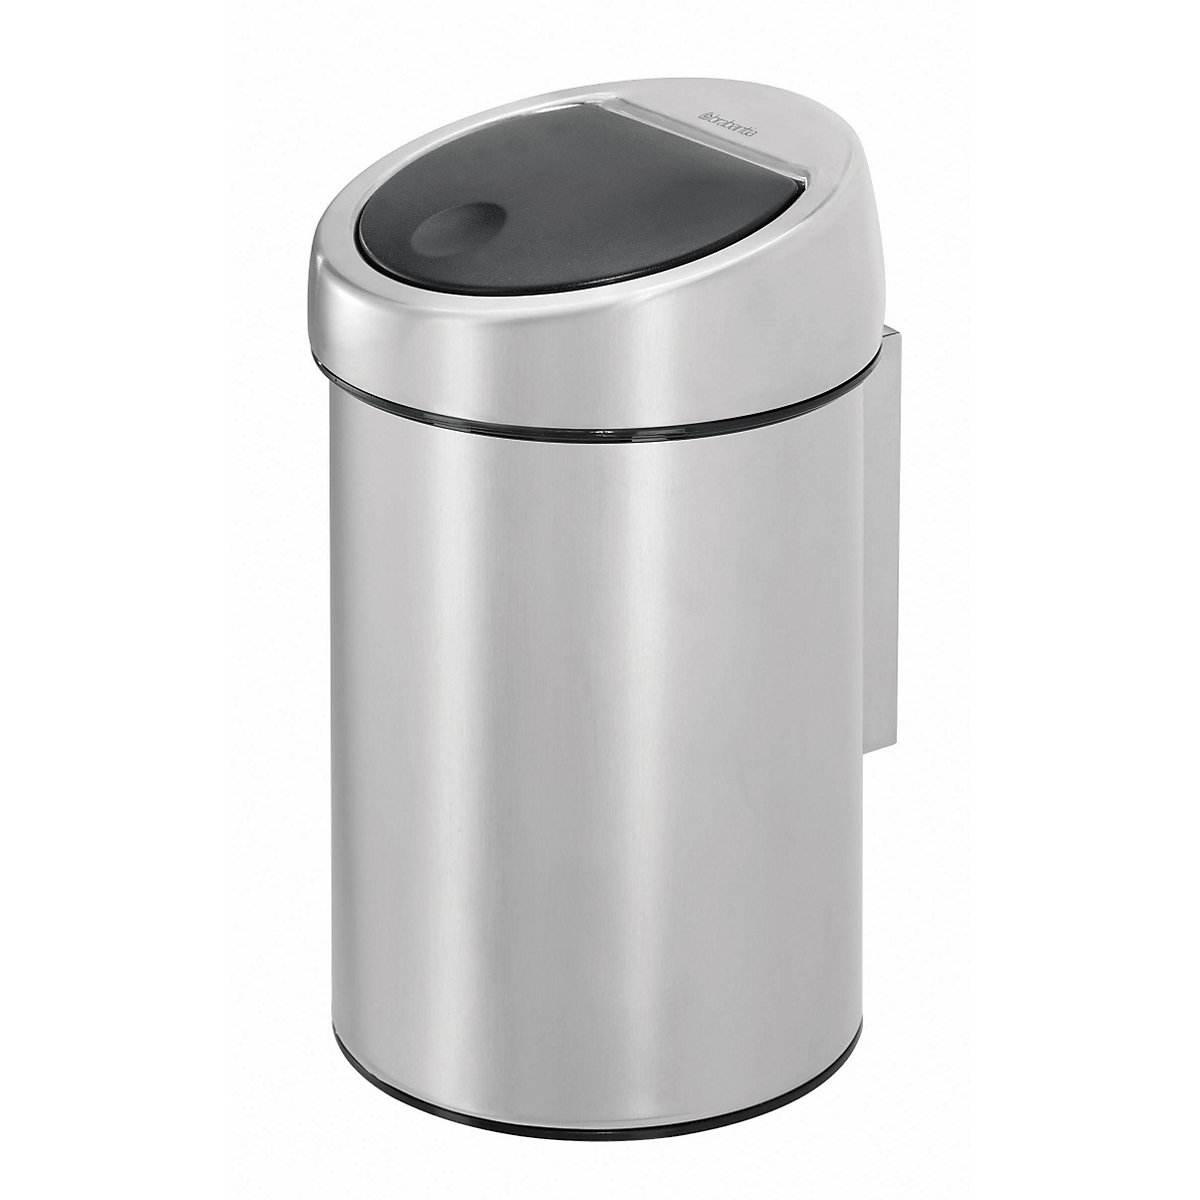 Wall mounted waste collector, stainless steel